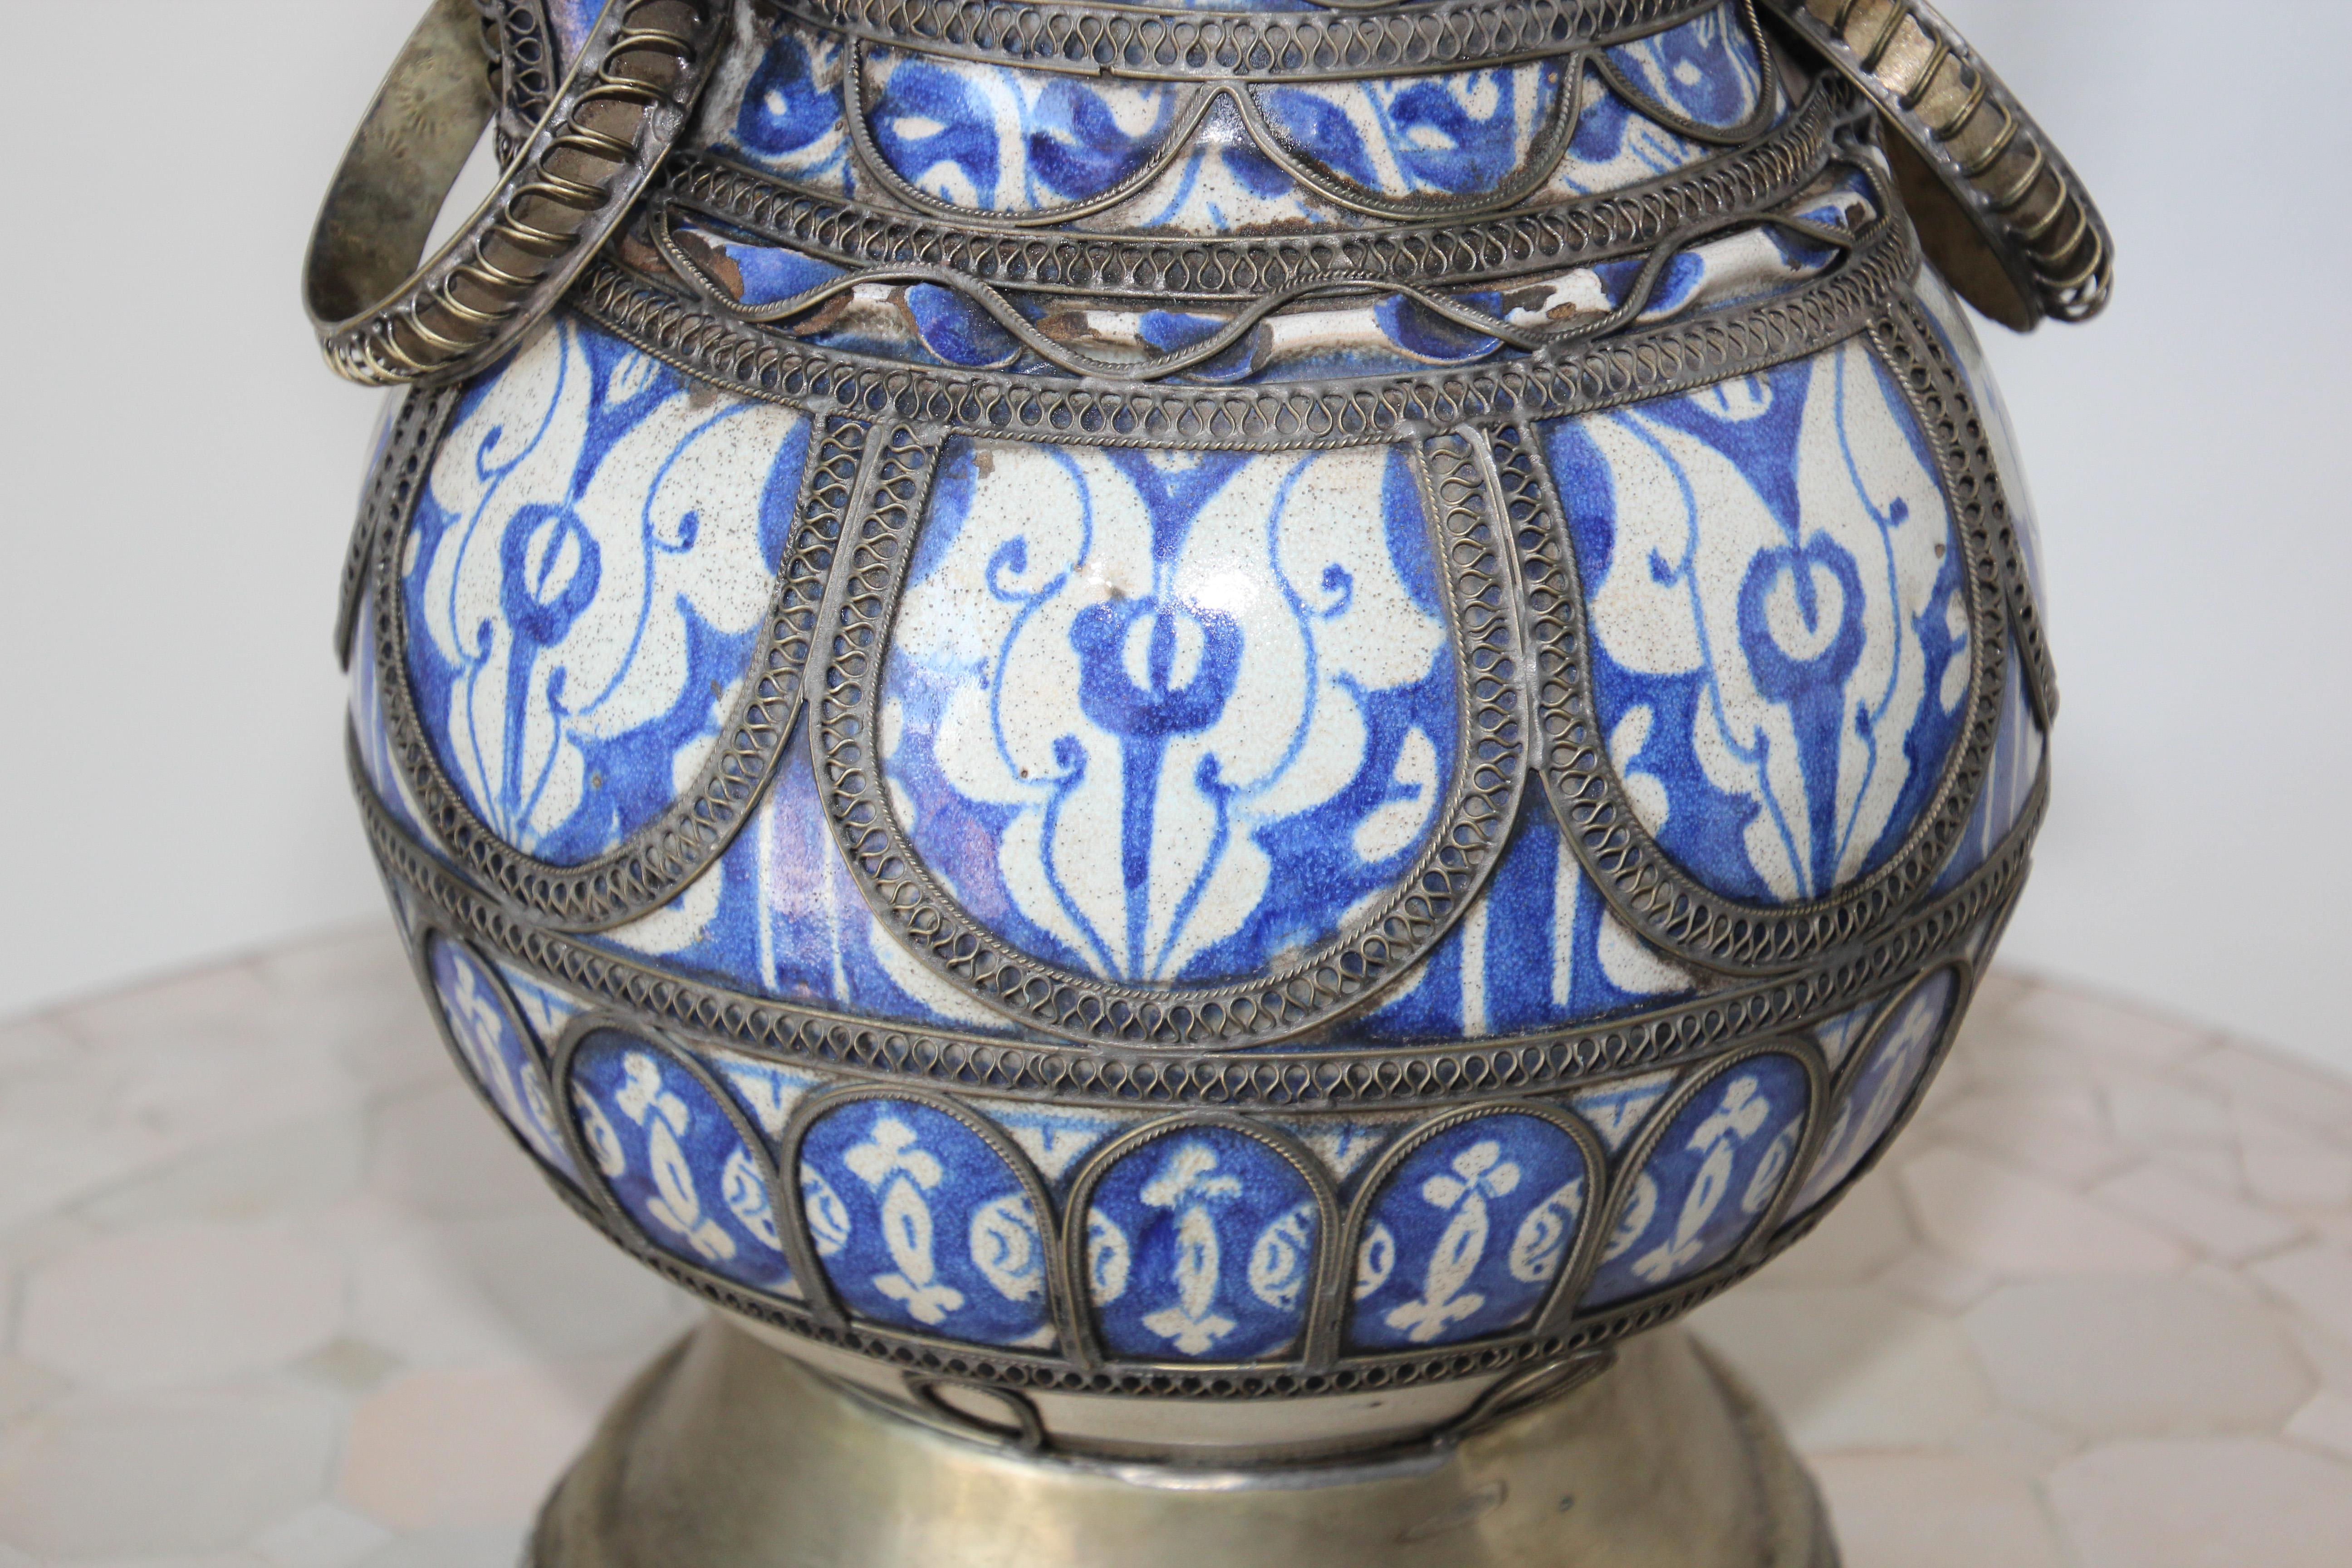  Moroccan Blue & White Ceramic Footed Vase from Fez with Silver Filigree For Sale 5